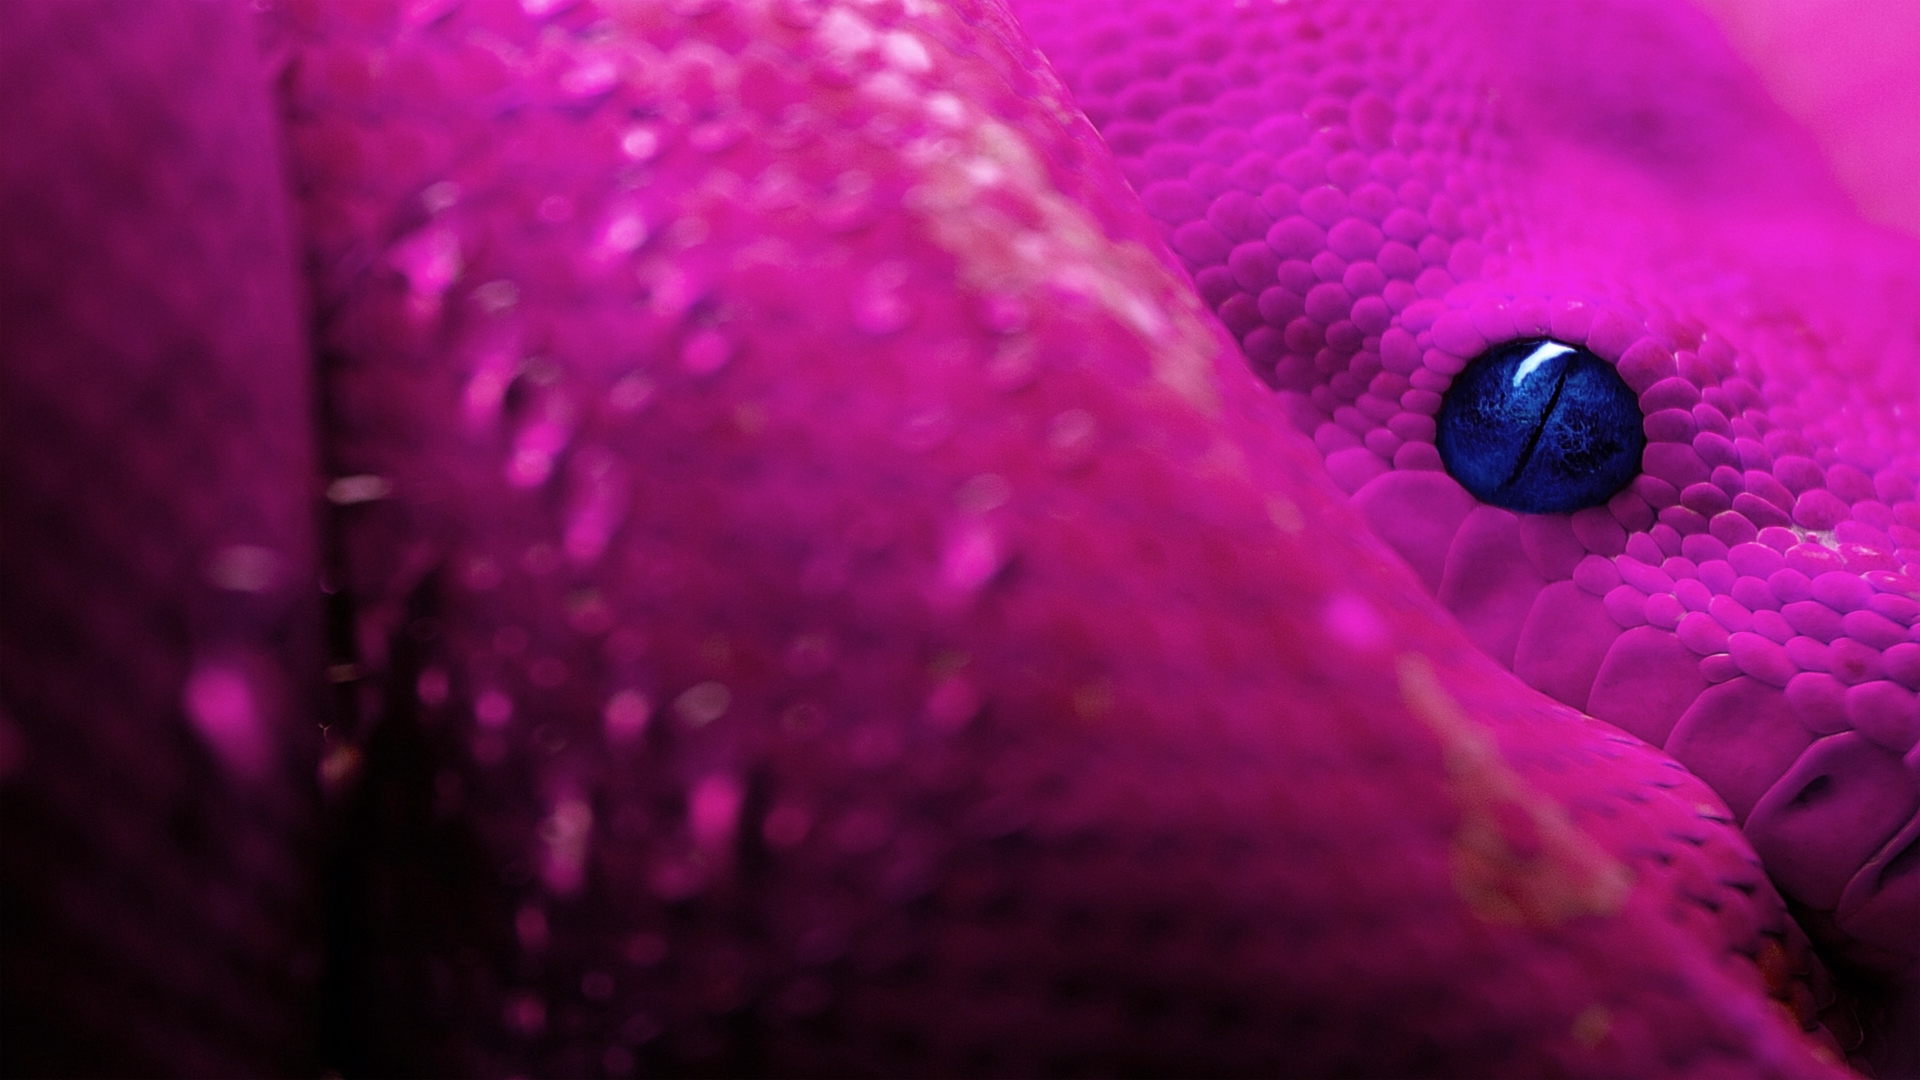 Vibrant snake scales gracefully intertwining against a dark background.